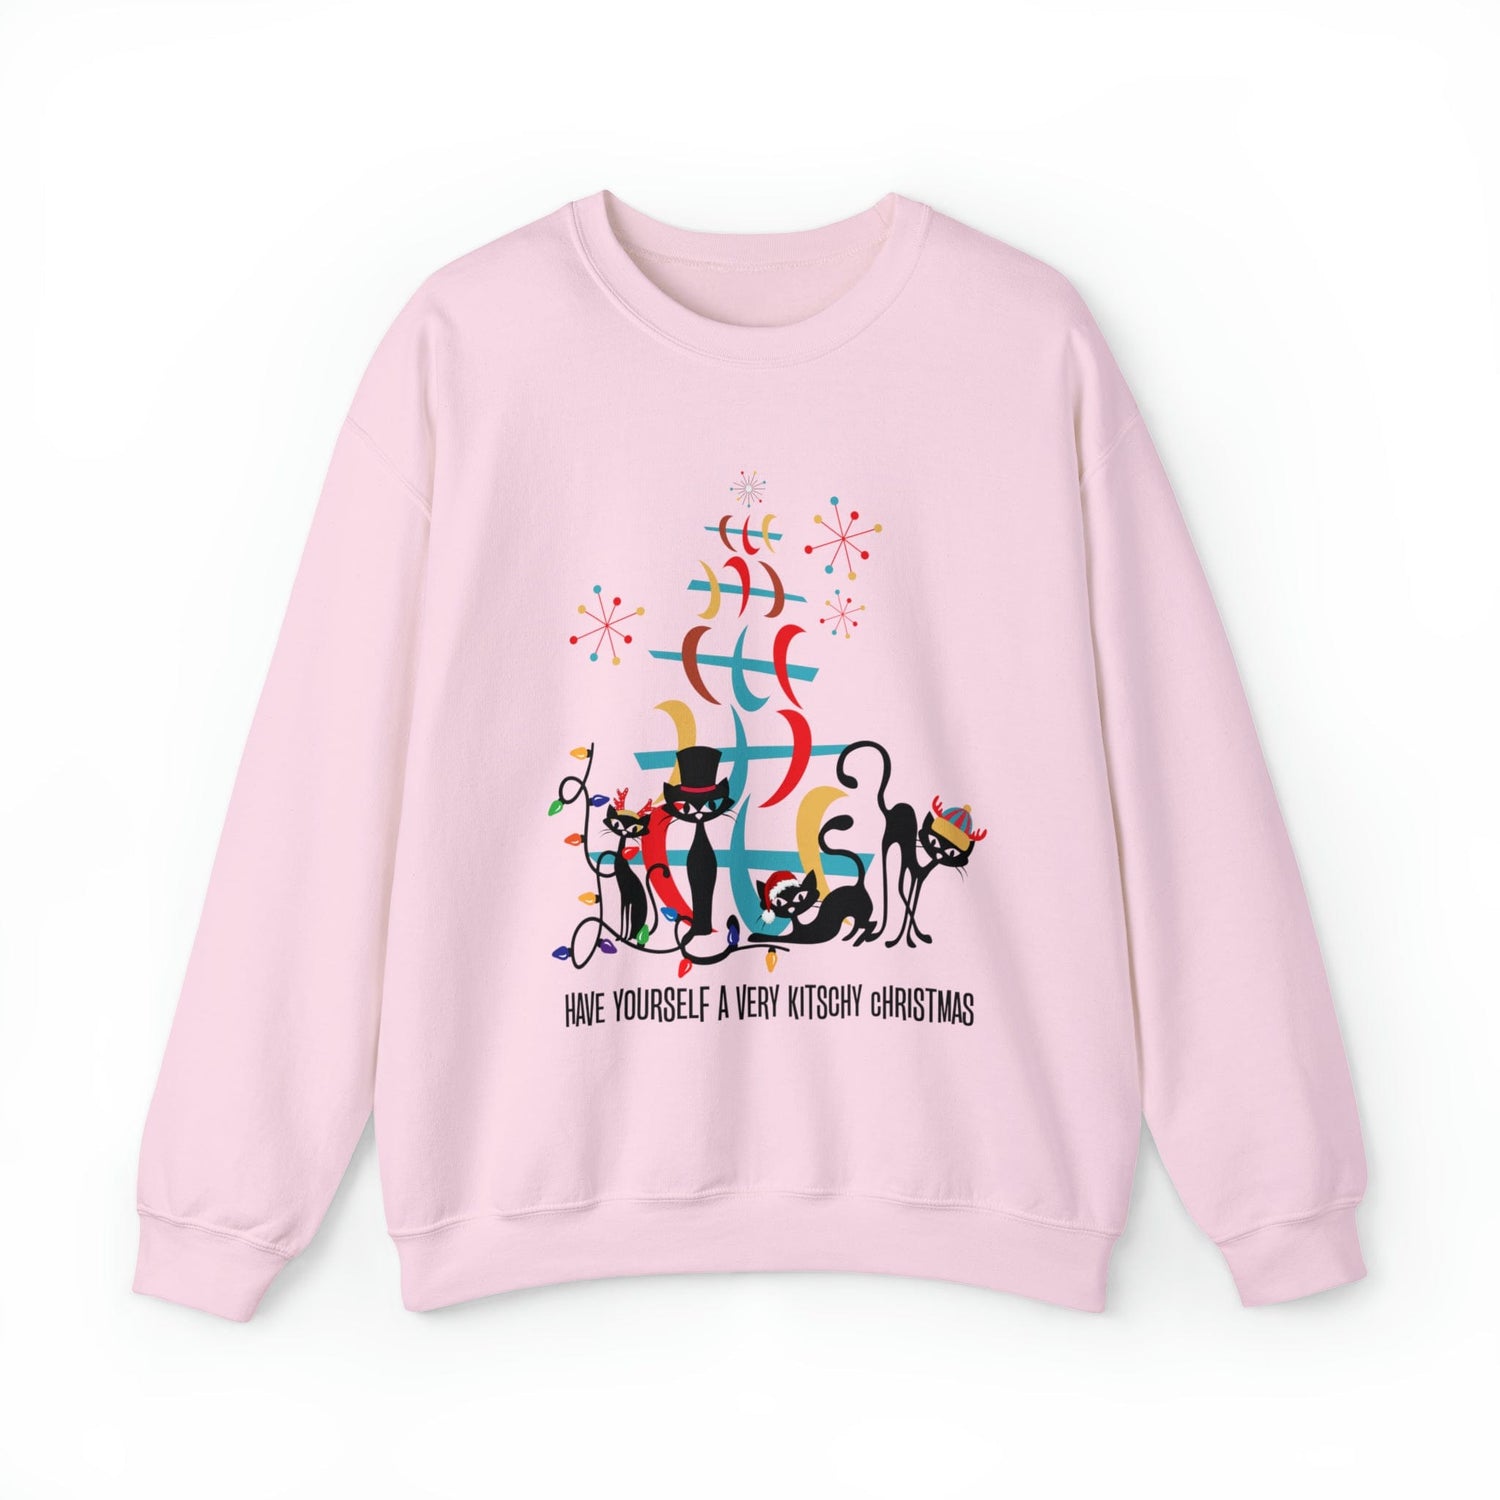 Atomic Cat Christmas Sweater, Have Yourself A Very Kitschy Christmas Cozy Loose Fit, Sweatshirt Sweatshirt M / Light Pink